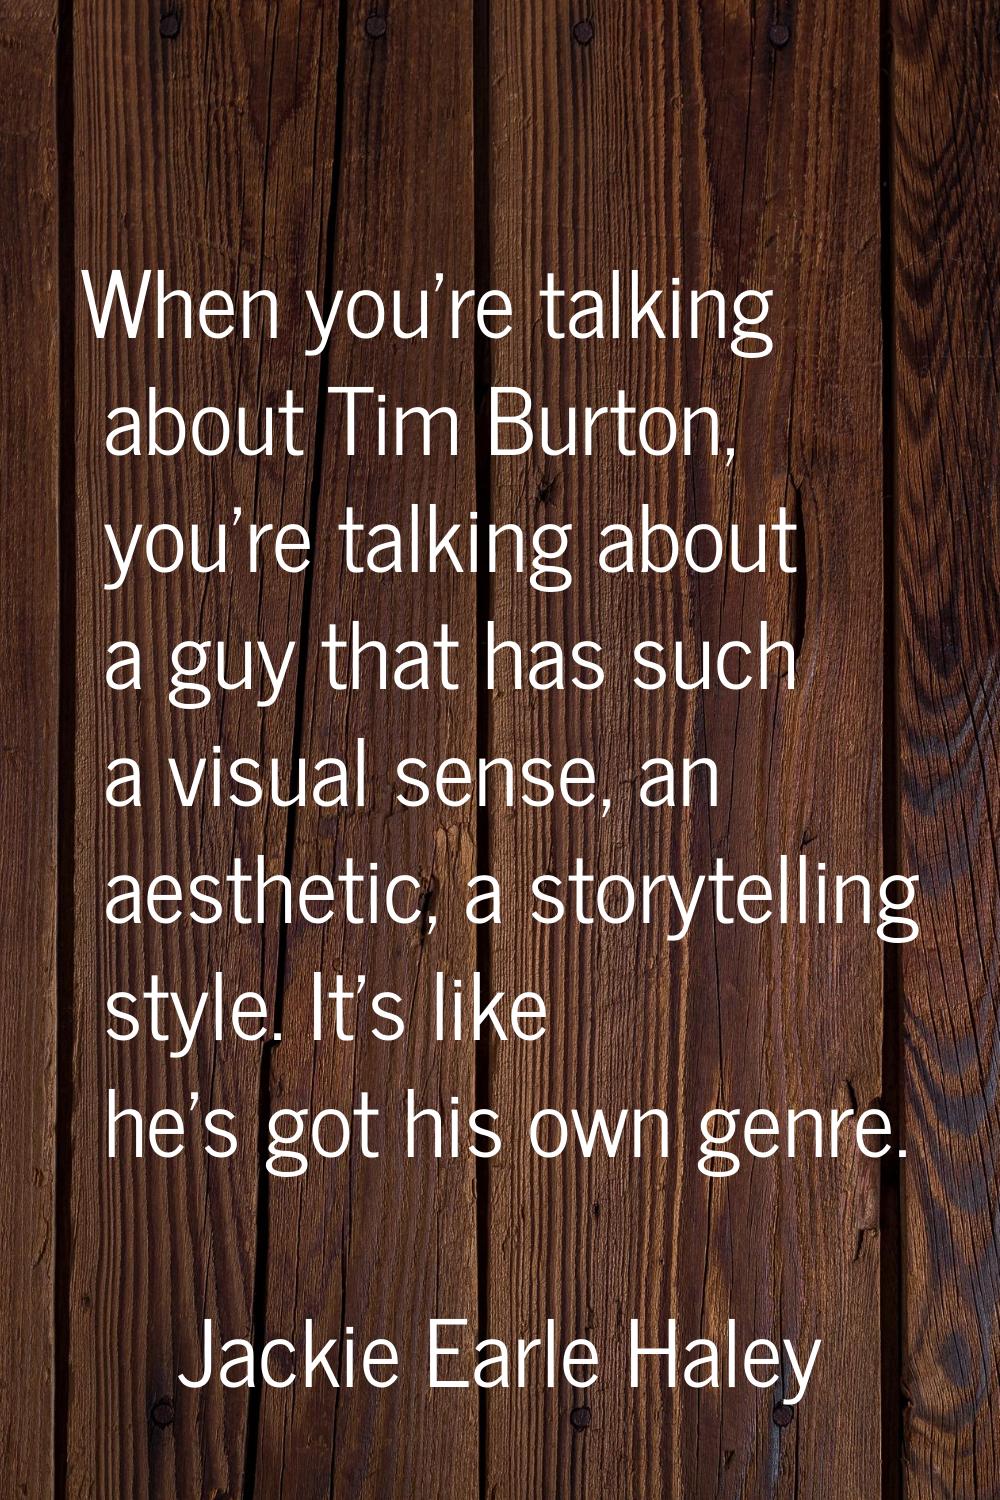 When you're talking about Tim Burton, you're talking about a guy that has such a visual sense, an a